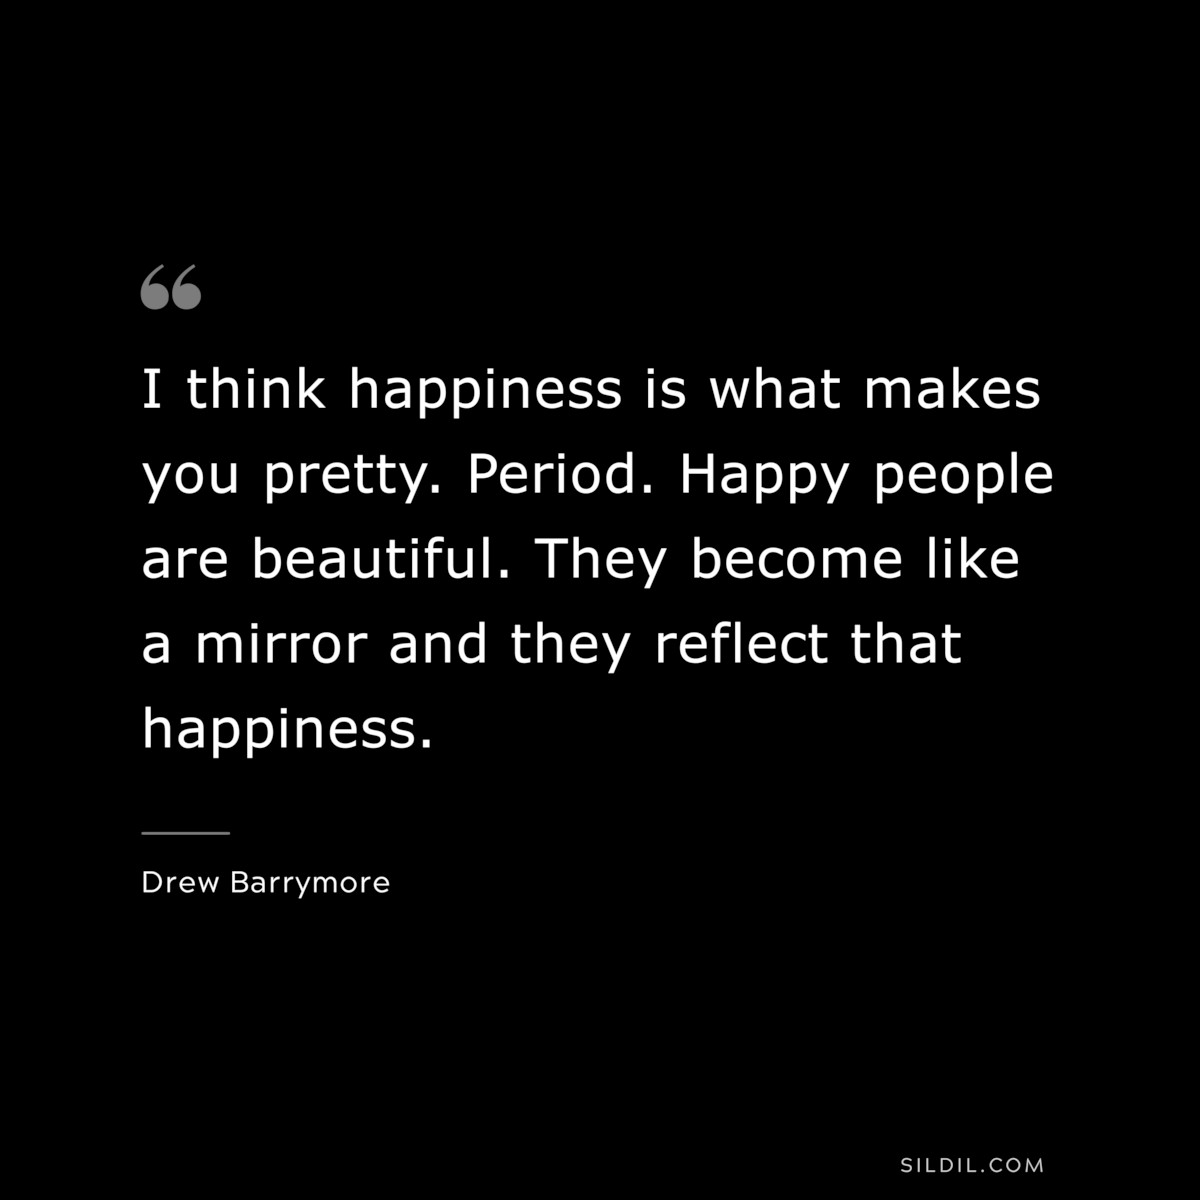 I think happiness is what makes you pretty. Period. Happy people are beautiful. They become like a mirror and they reflect that happiness. ― Drew Barrymore